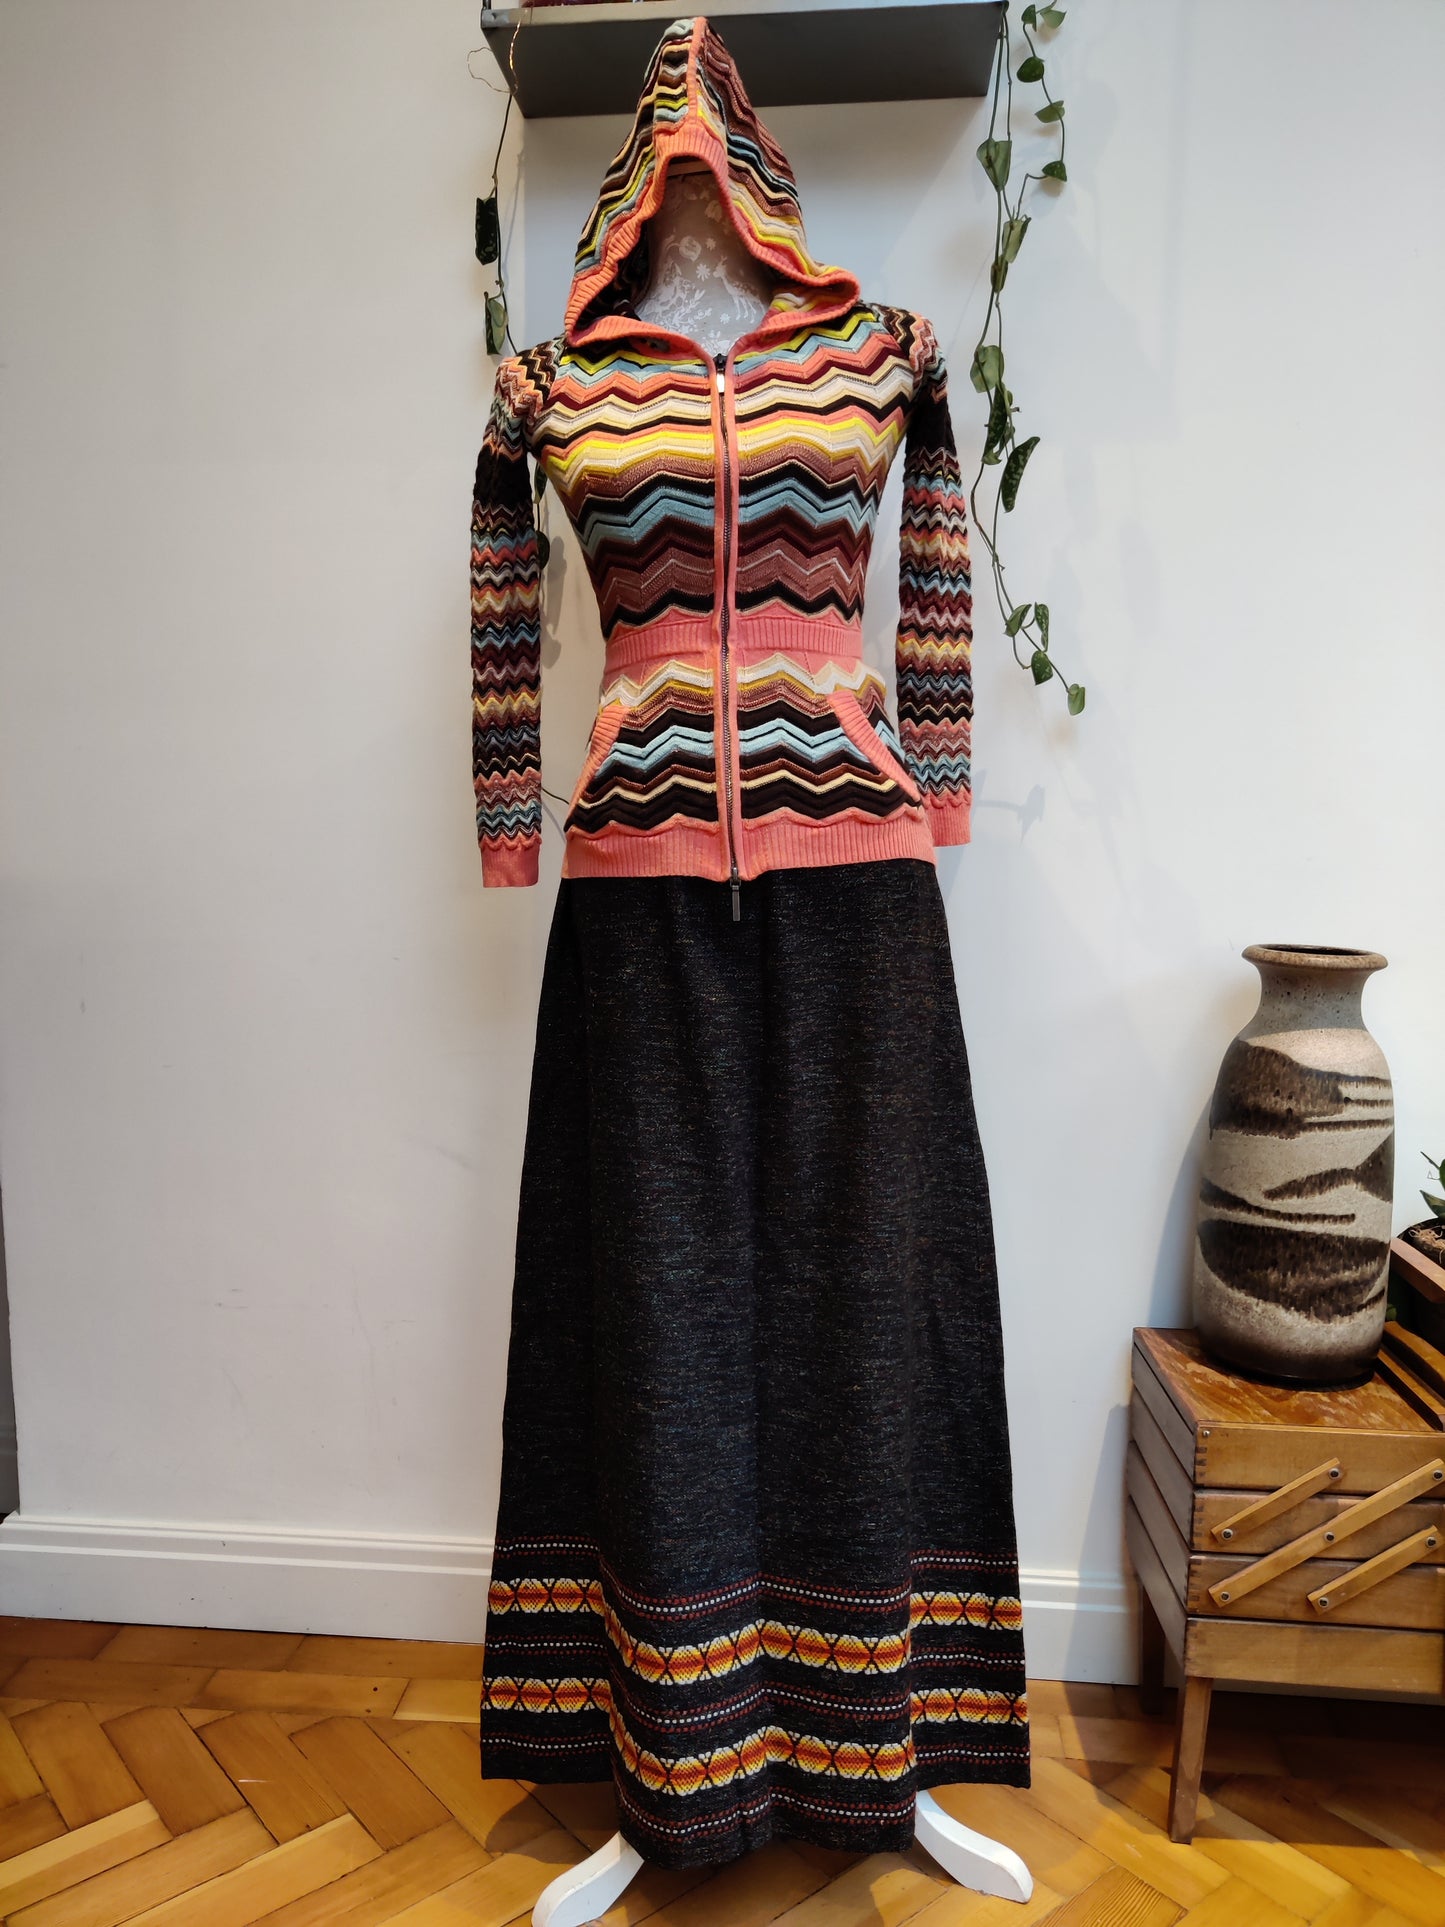 Missoni hooded top size 6-8.